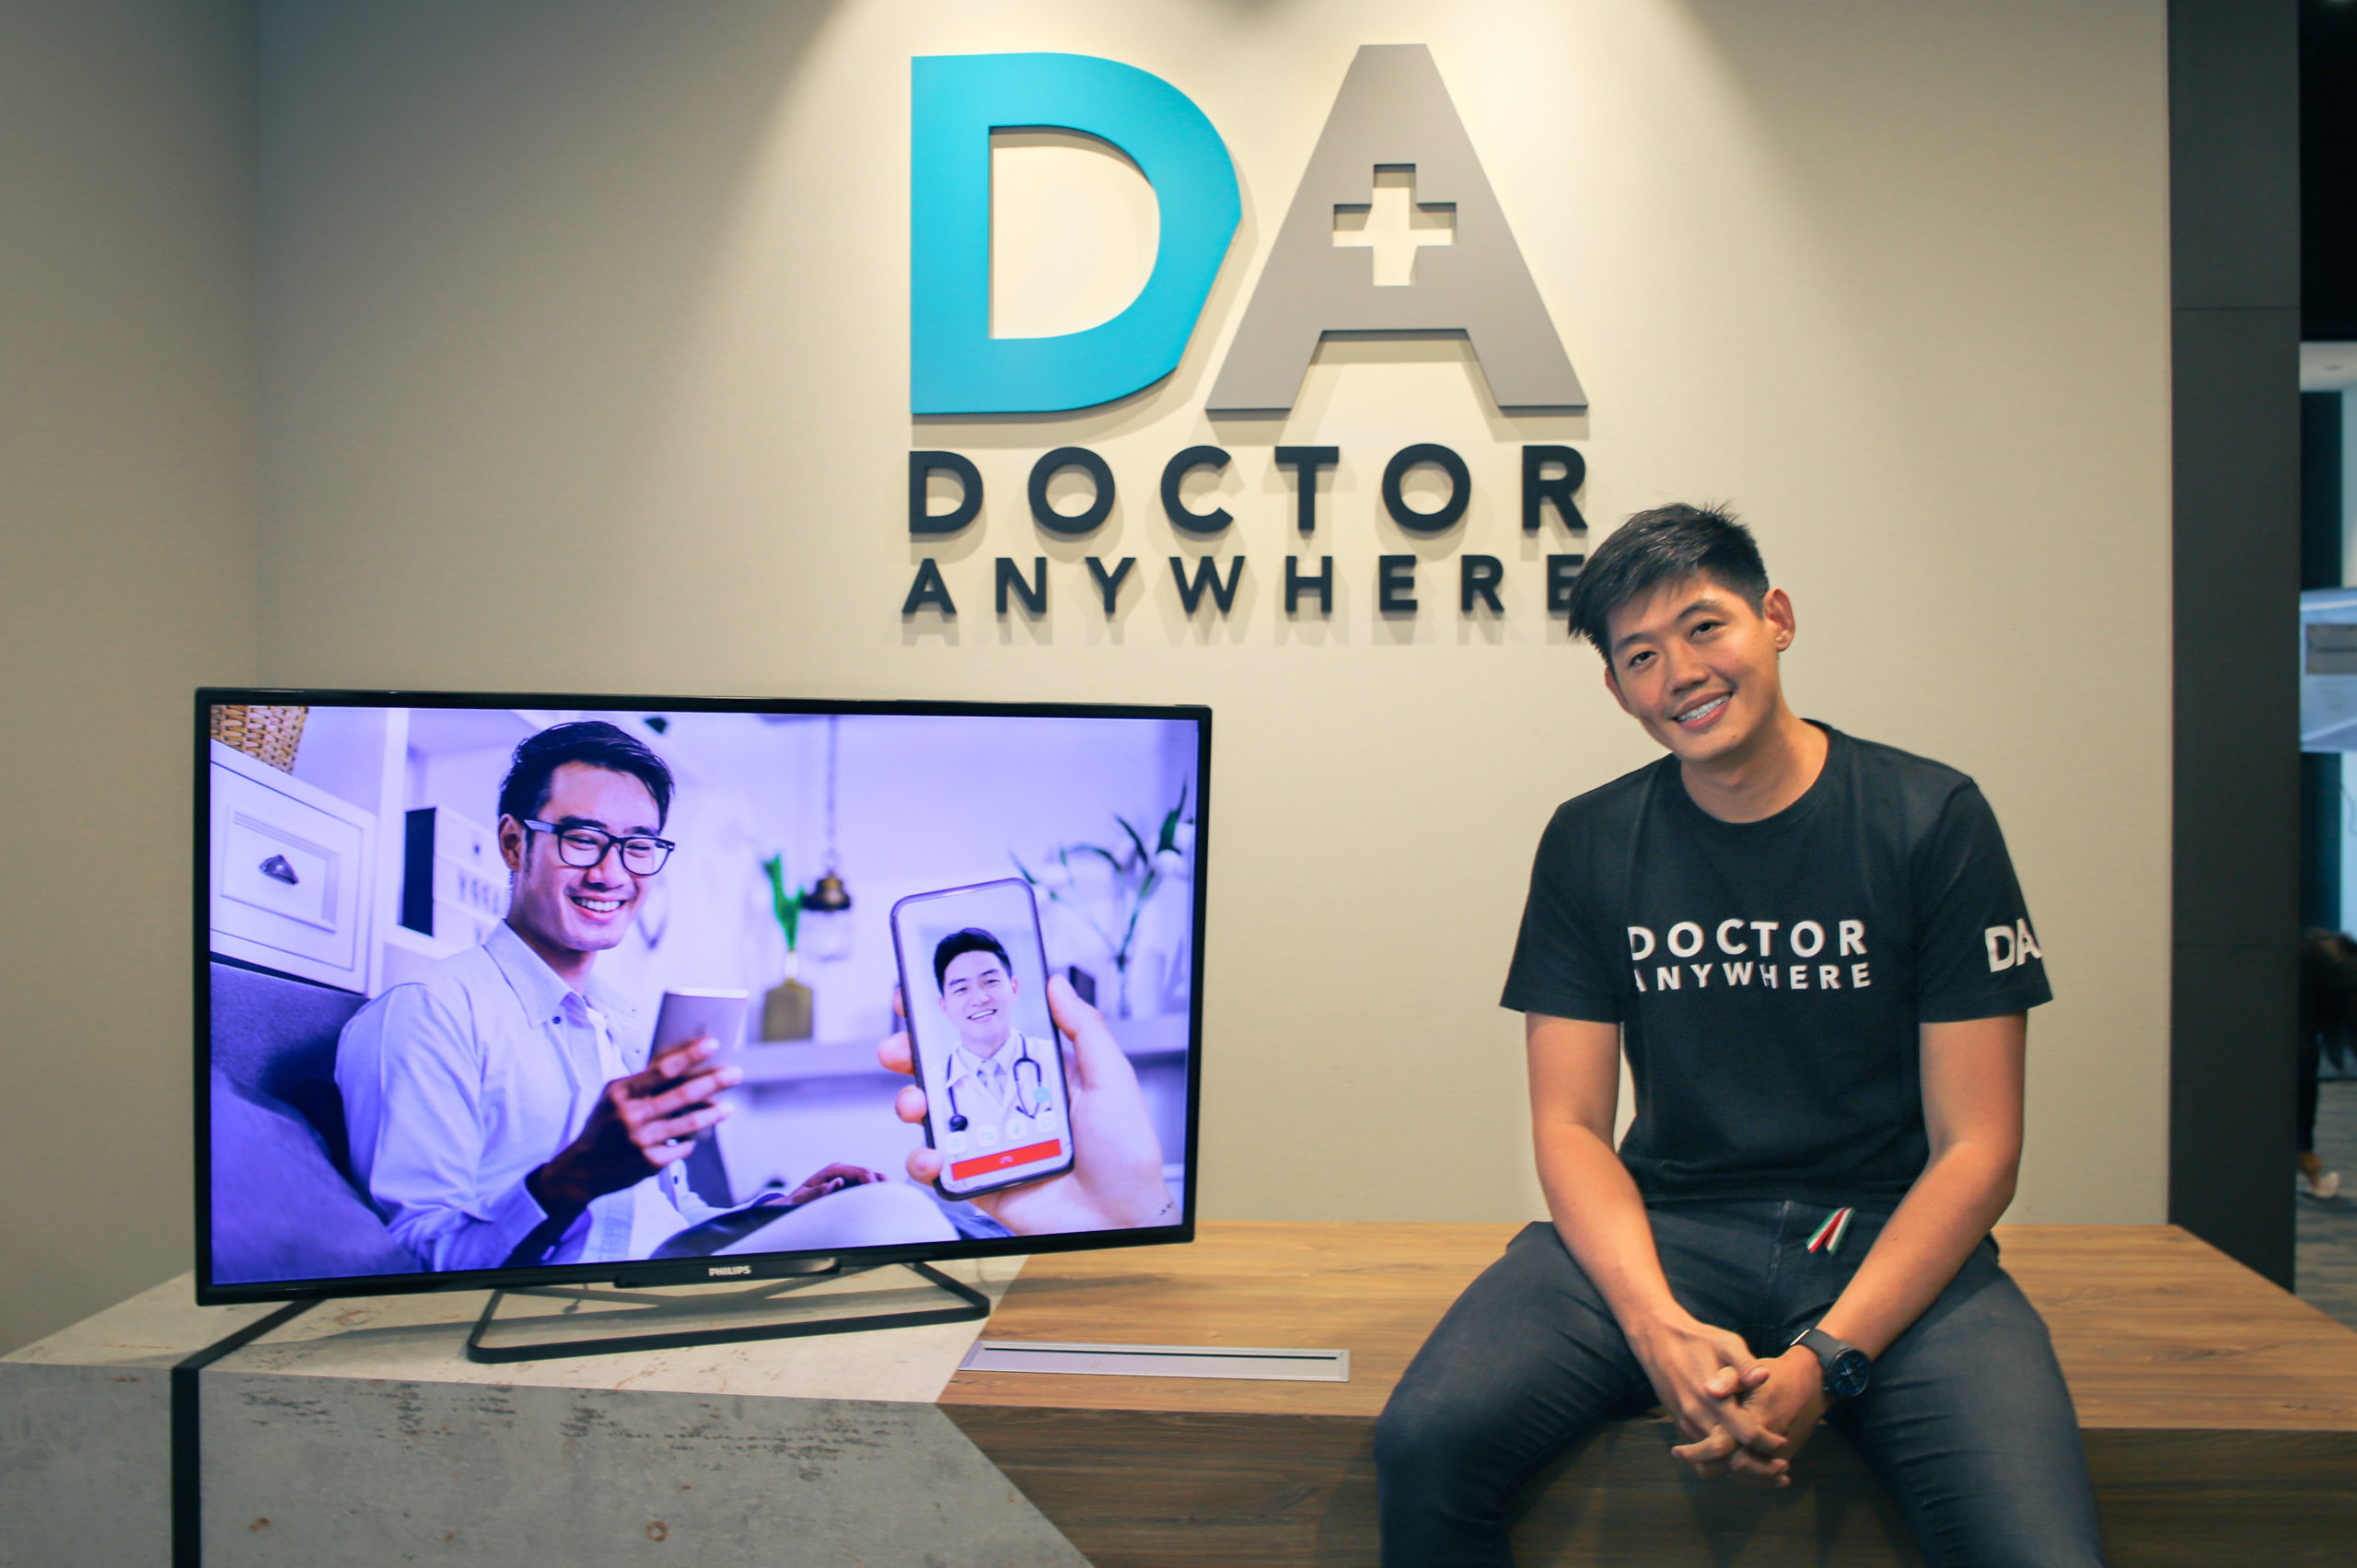 Doctor Anywhere bags USD 65 million in one of Southeast Asia’s largest telehealth funding rounds